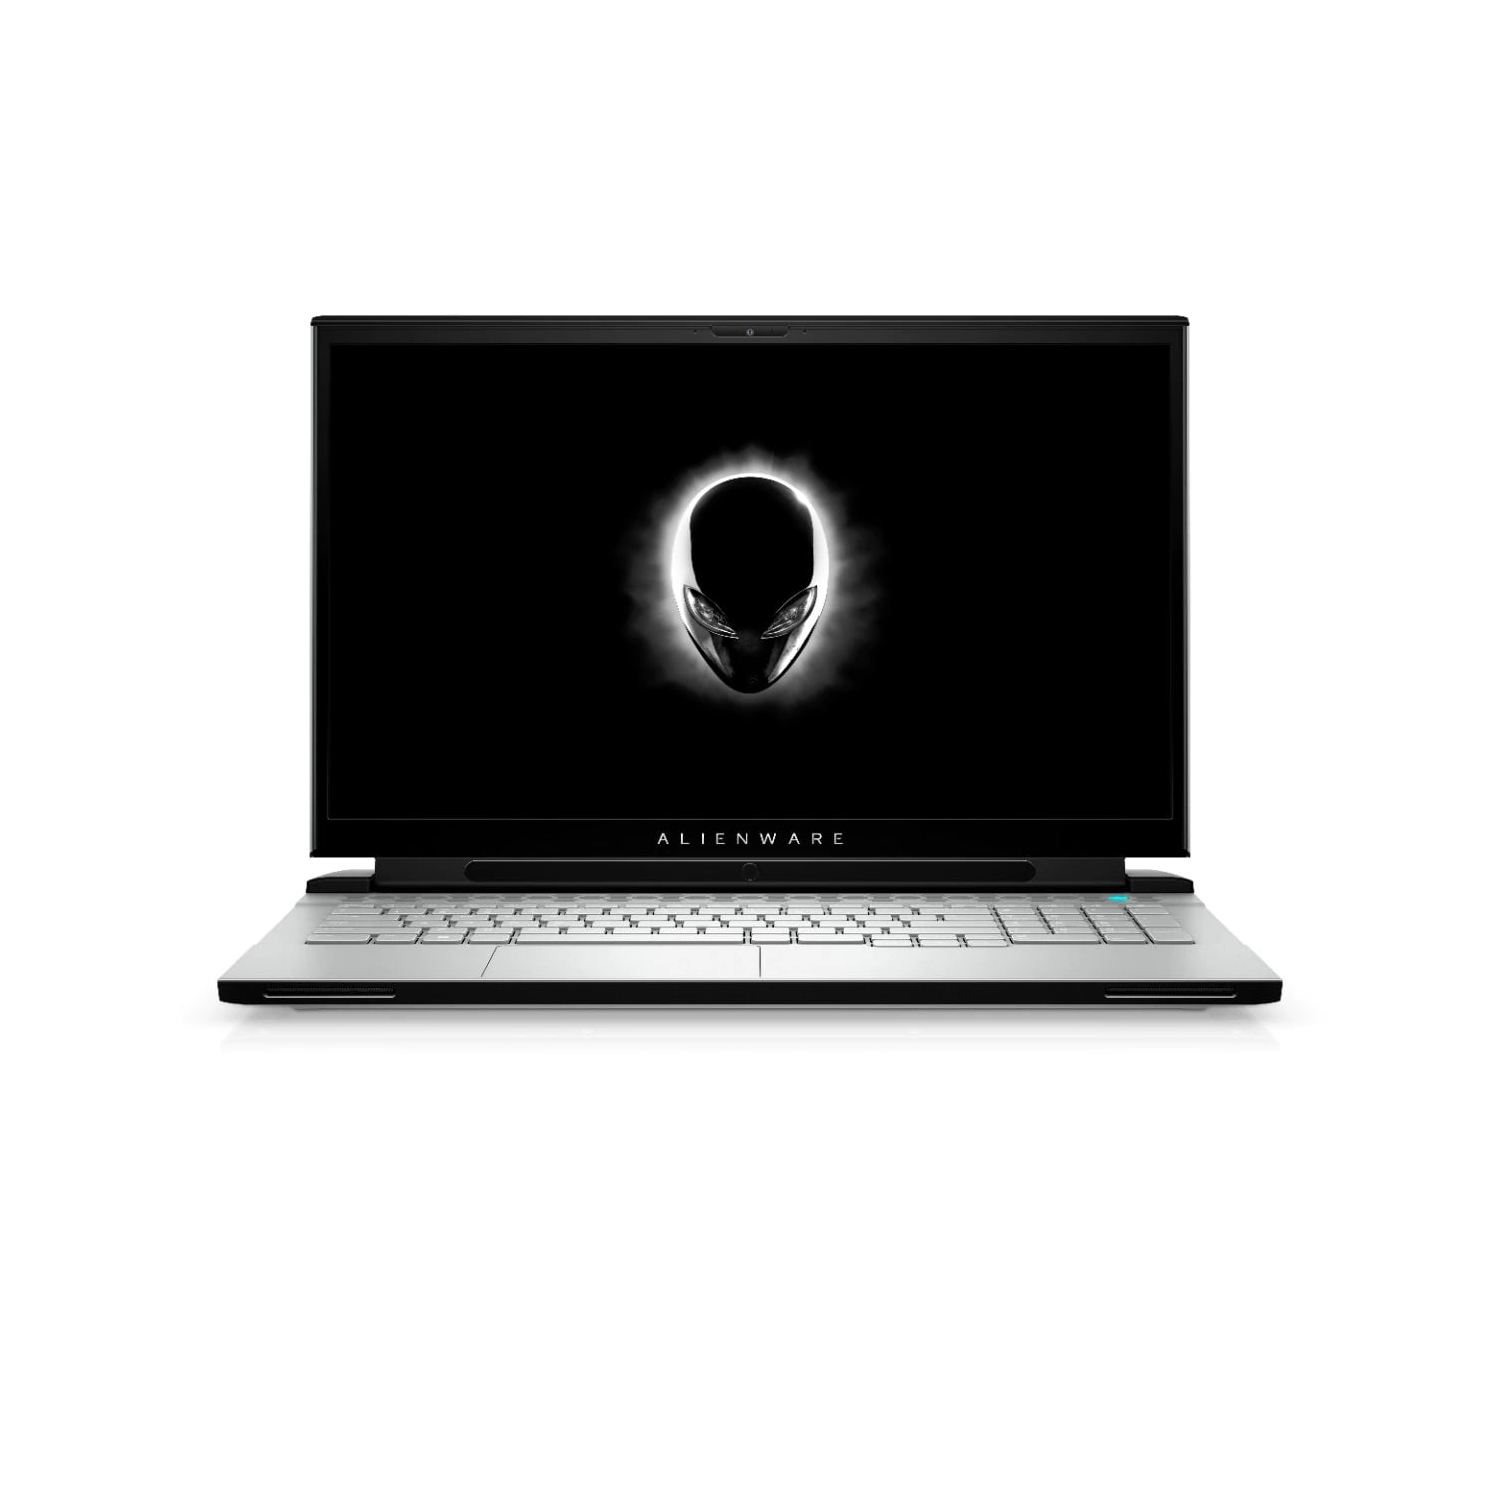 Refurbished (Excellent) - Dell Alienware m17 R3 Gaming Laptop (2020), 17.3" FHD, Core i7, 1TB SSD, 16GB RAM, RTX 2060, 6 Cores @ 5 GHz, 10th Gen CPU Certified Refurbished